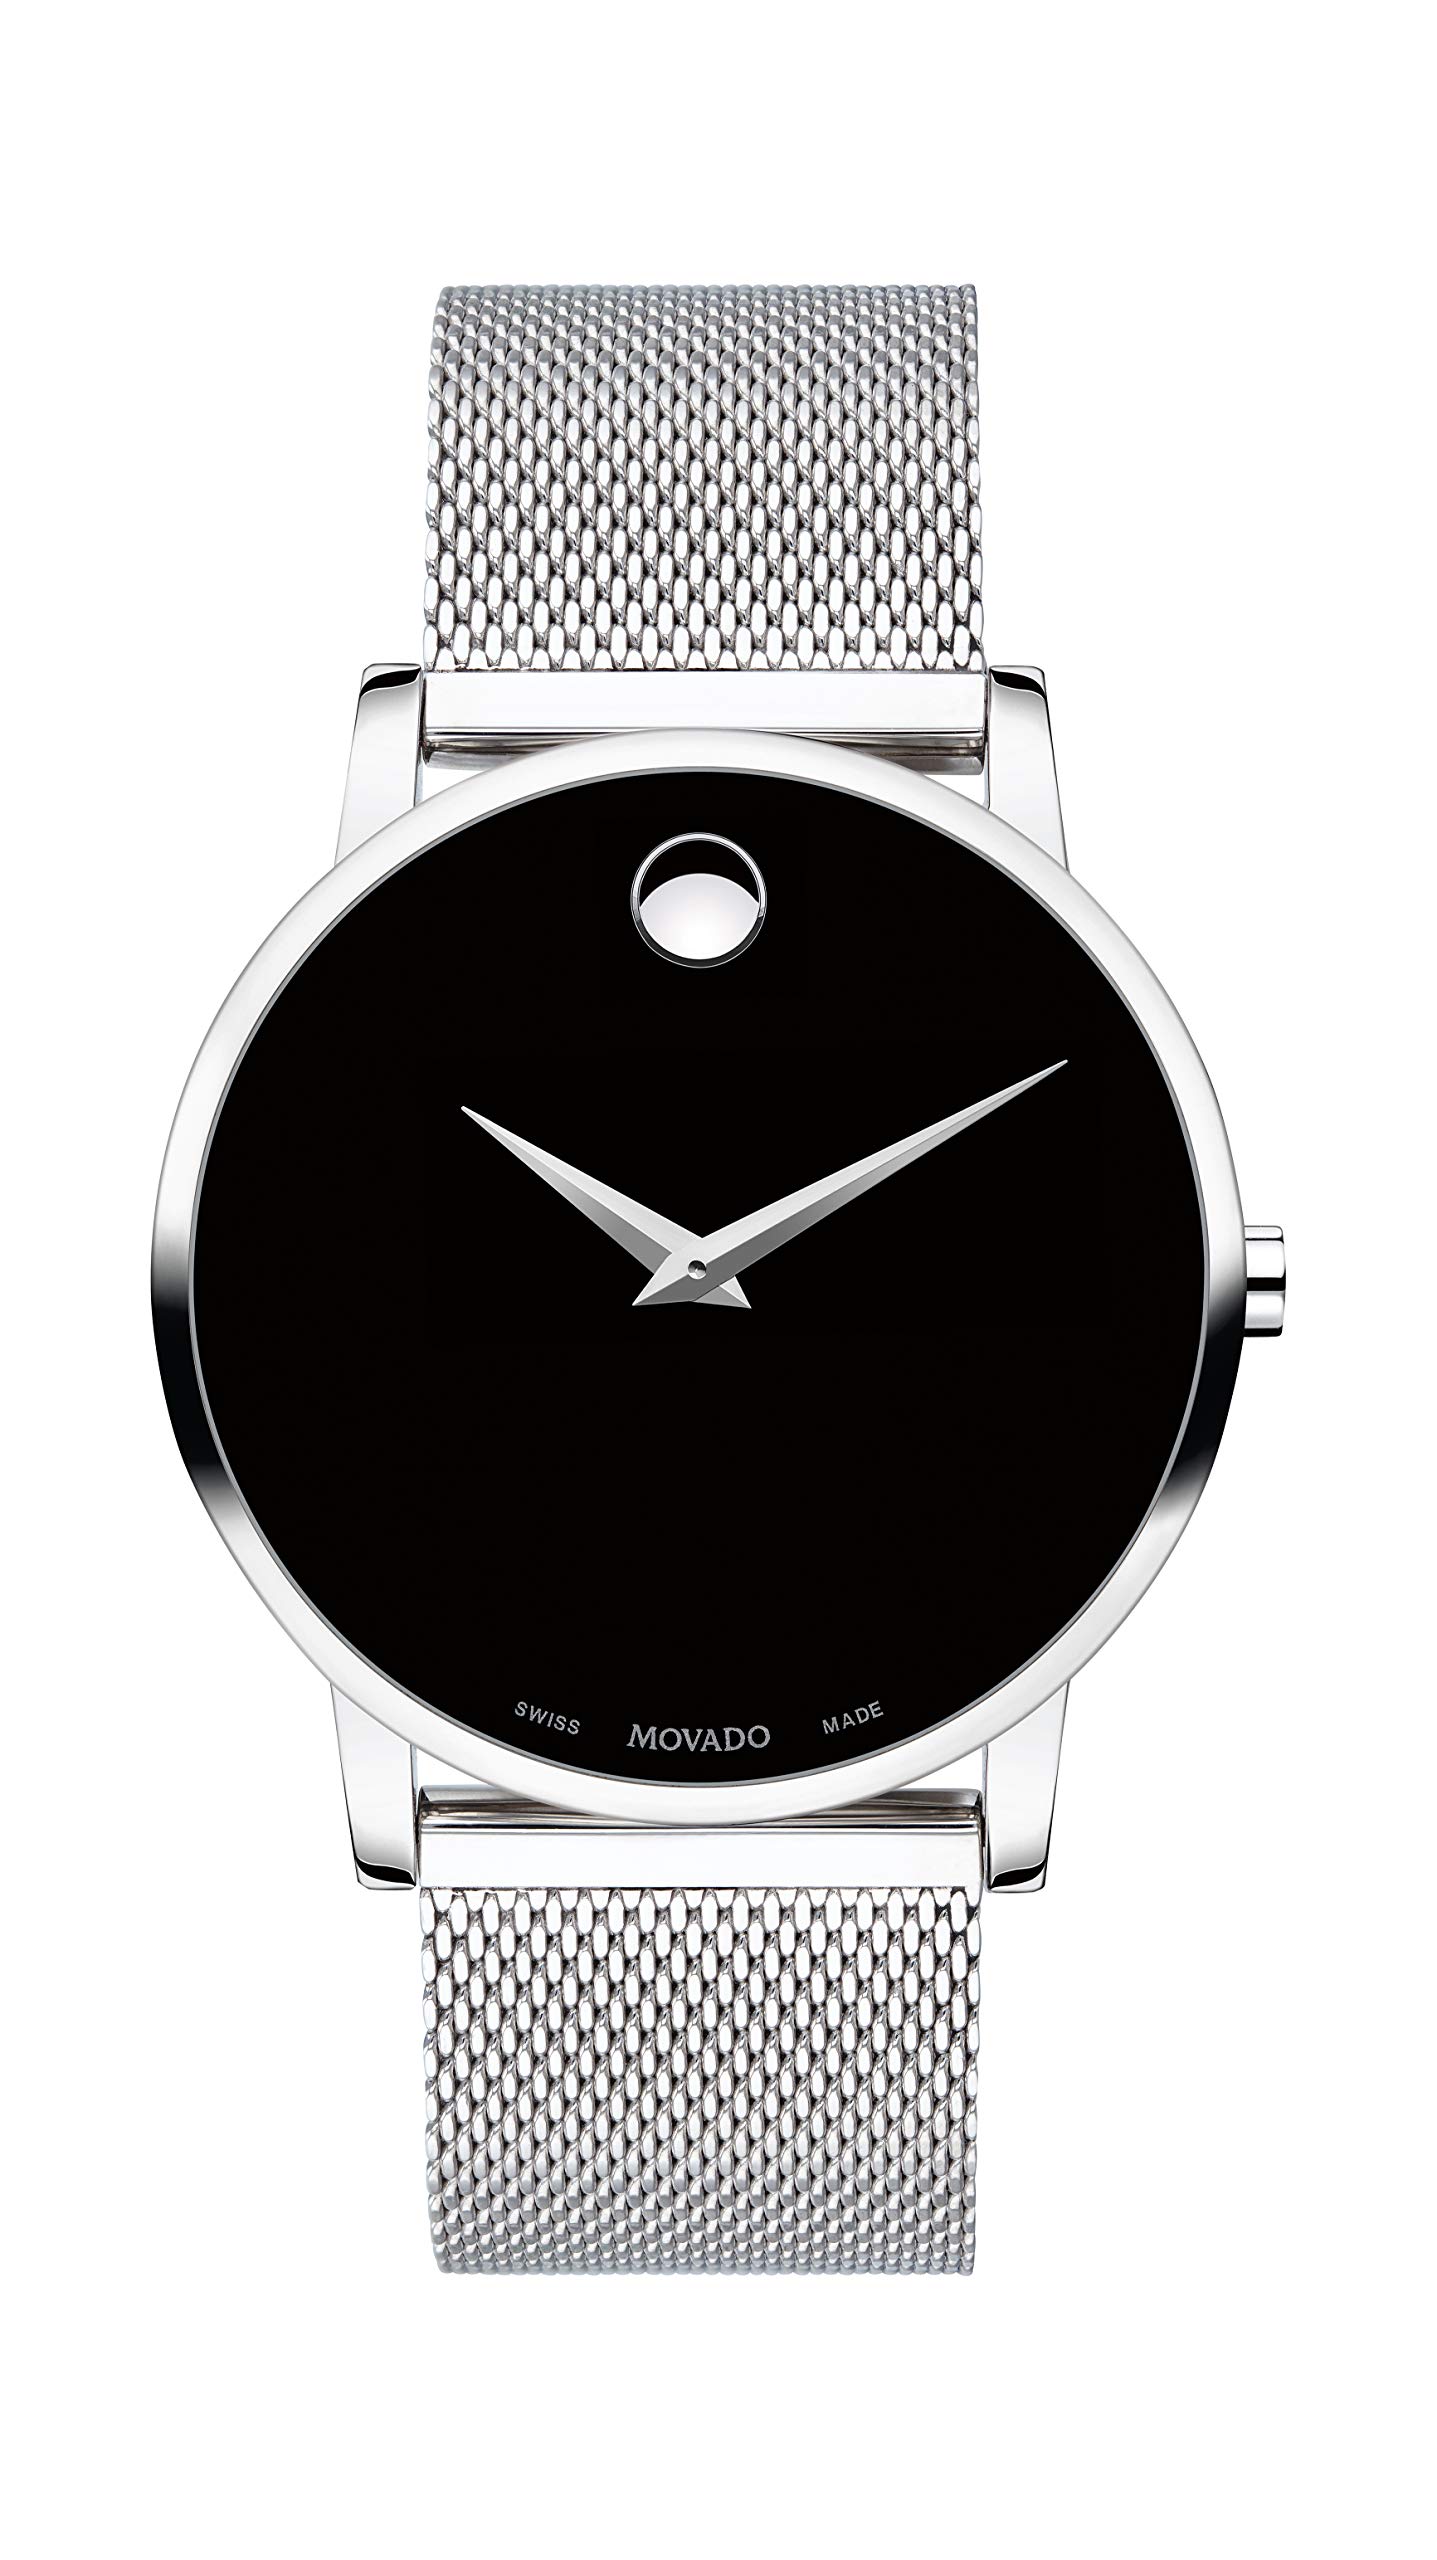 Movado Men's Museum Stainless Steel Watch with Concave Dot Museum Dial, Black/Silver (Model 607219)